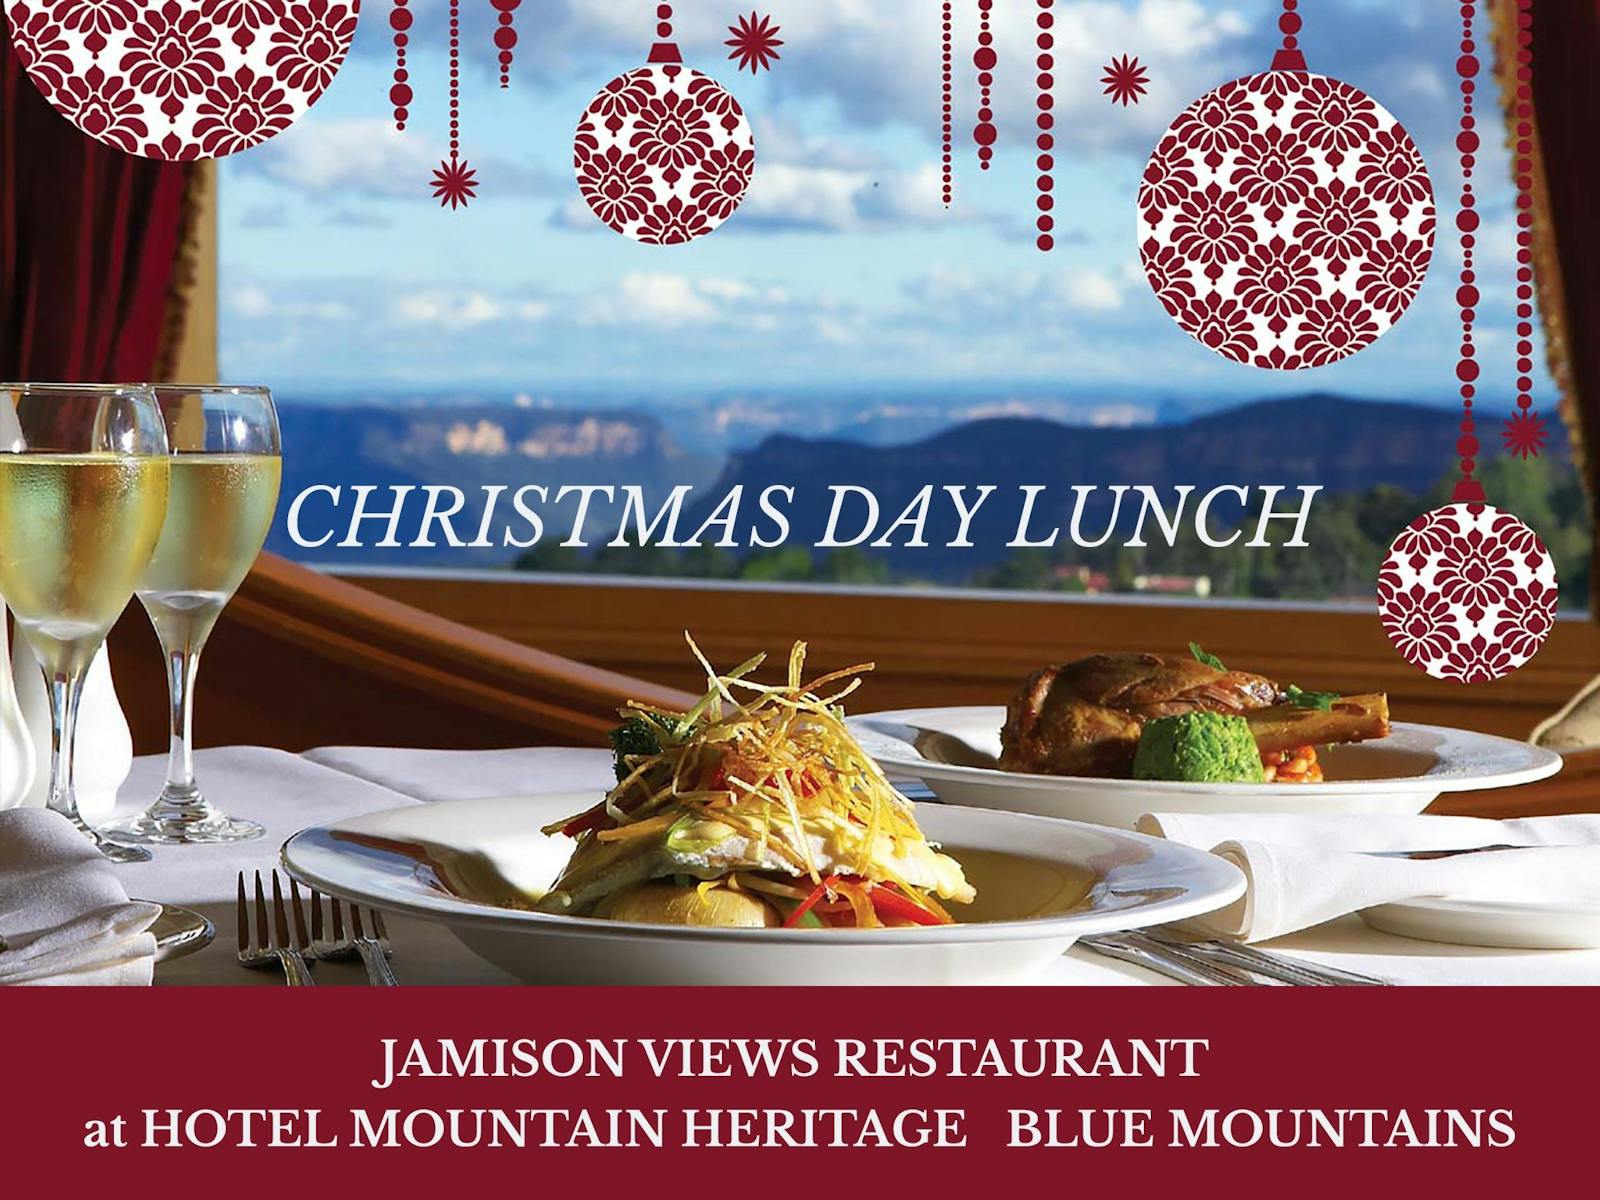 Image for Christmas Day Lunch Hotel Mountain Heritage